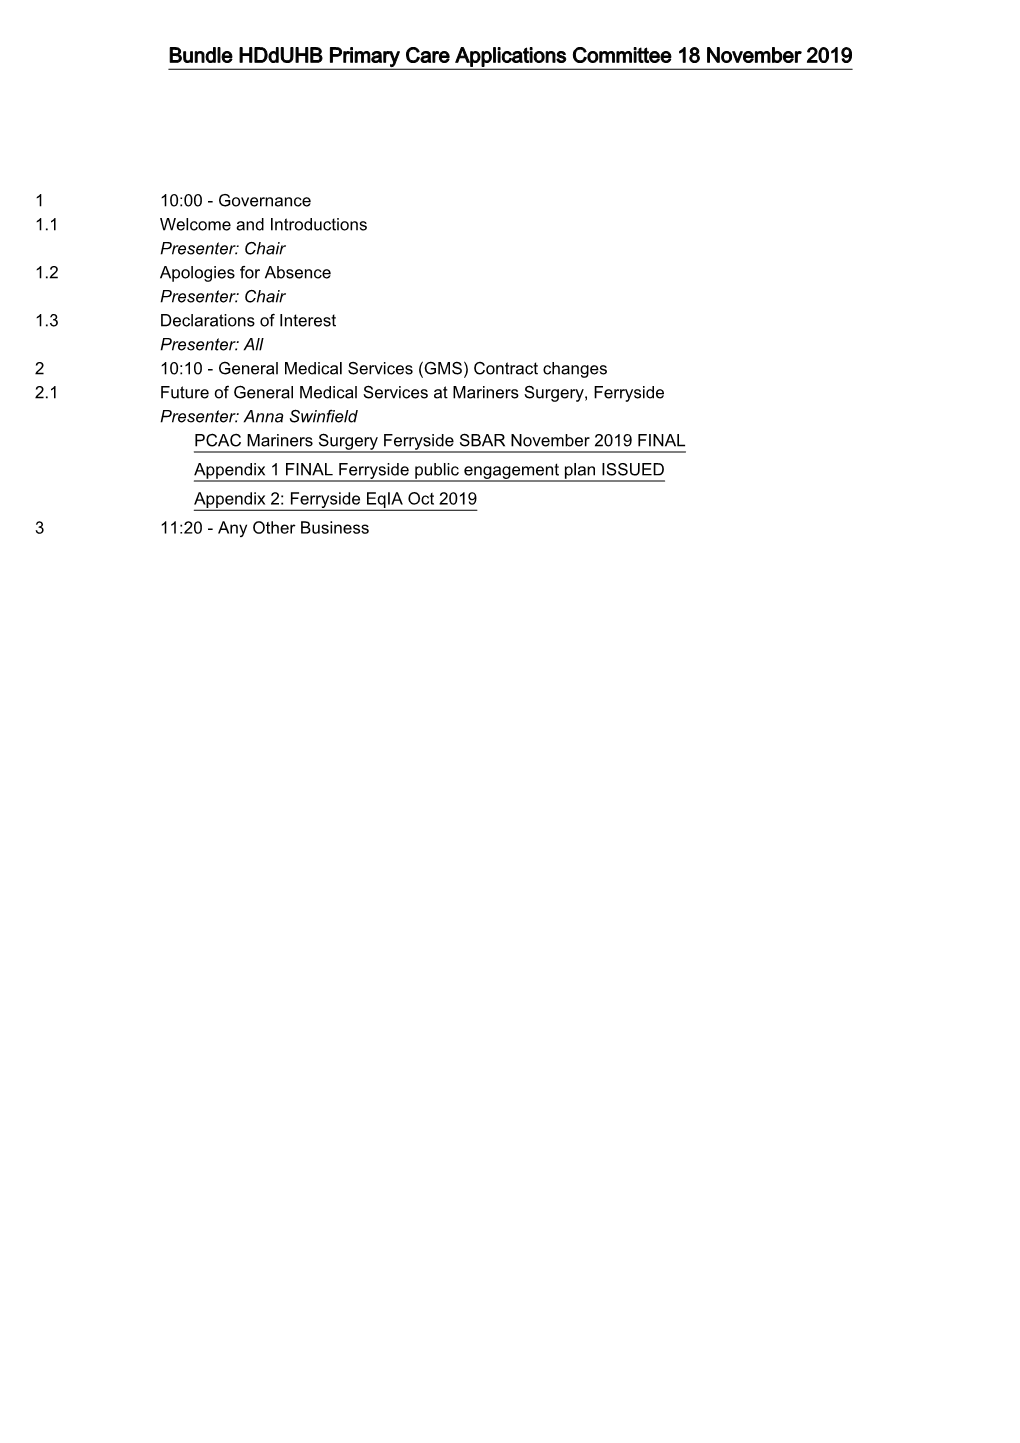 Bundle Hdduhb Primary Care Applications Committee 18 November 2019